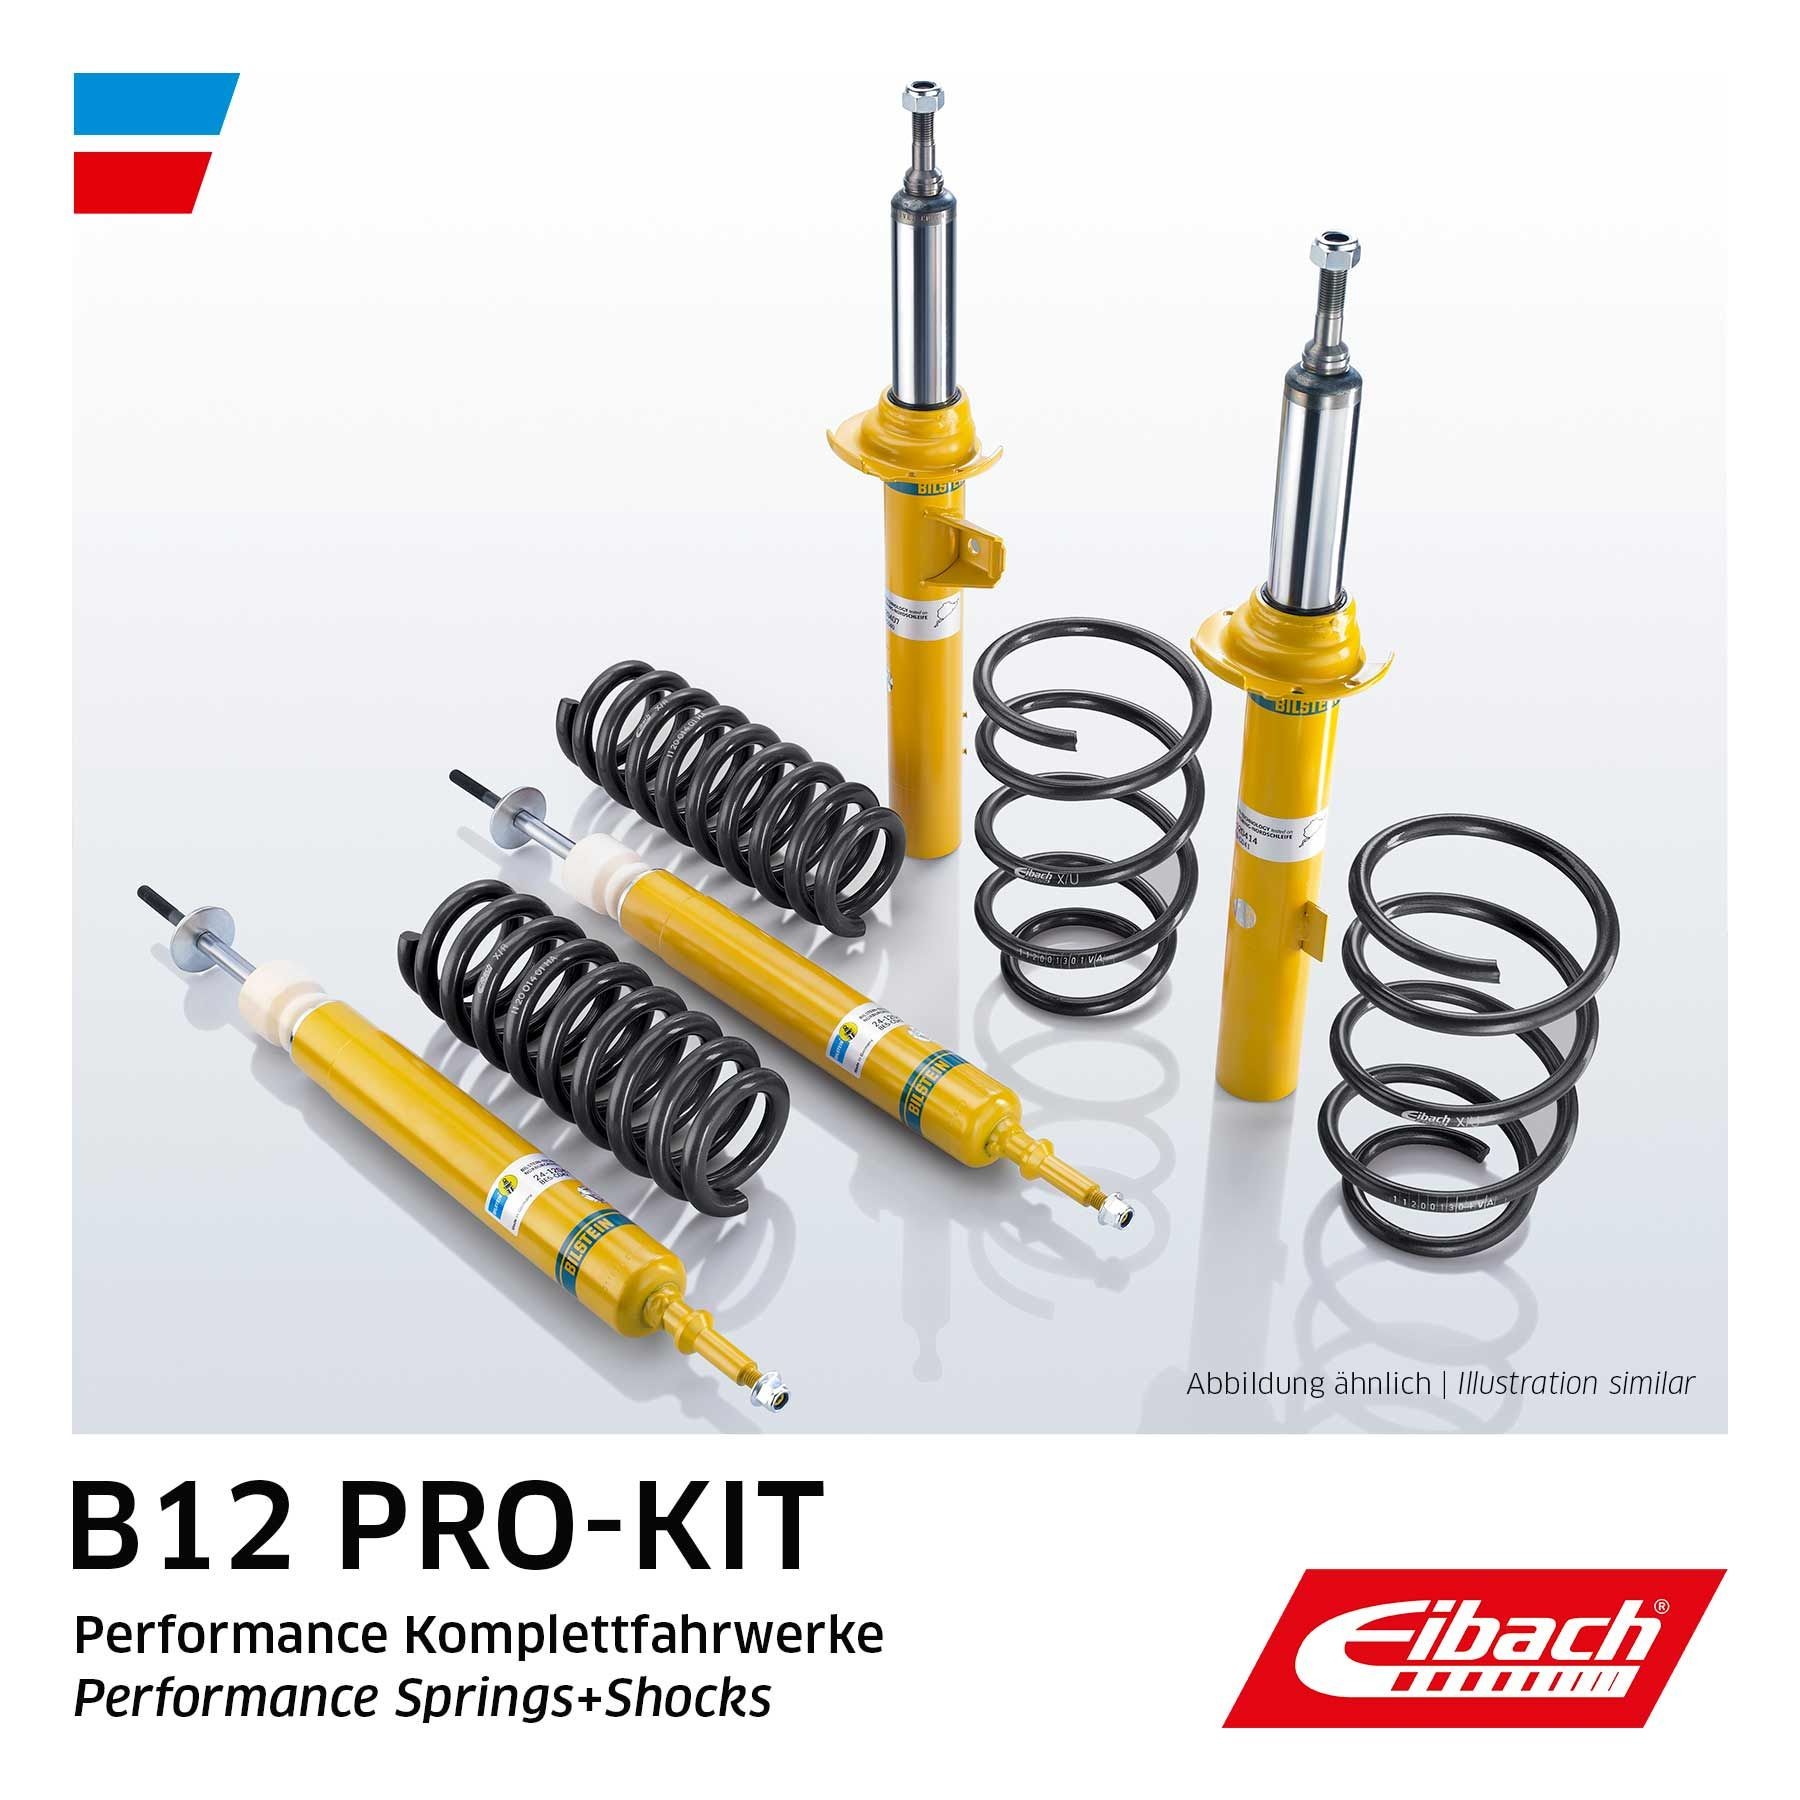 EIBACH E90-75-017-01-22 Renault CLIO 2012 Suspension kit, coil springs / shock absorbers